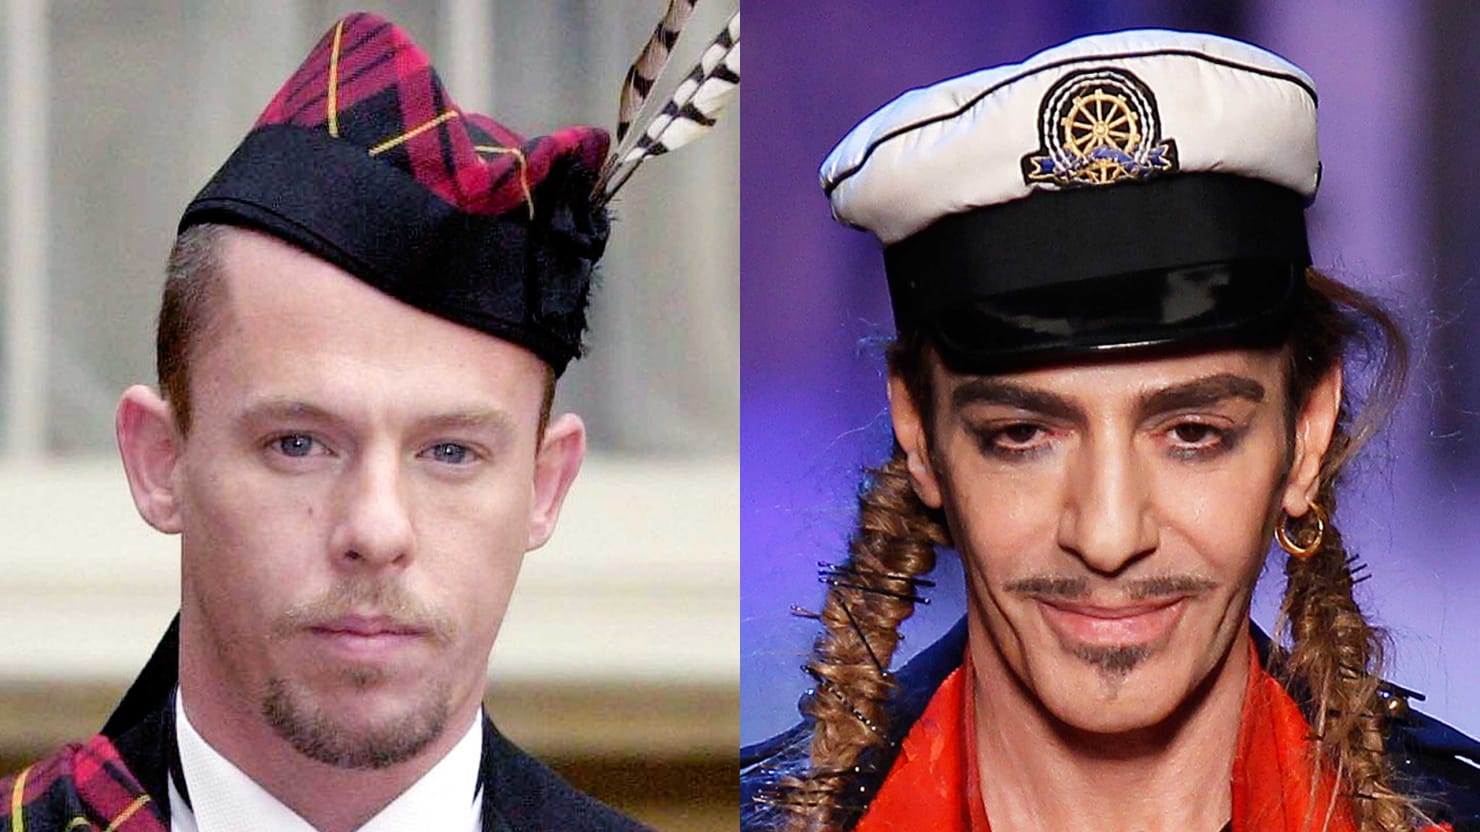 John Galliano to appear on Charlie Rose in first TV interview since 2011  anti-Semitic rant that cost him Dior job